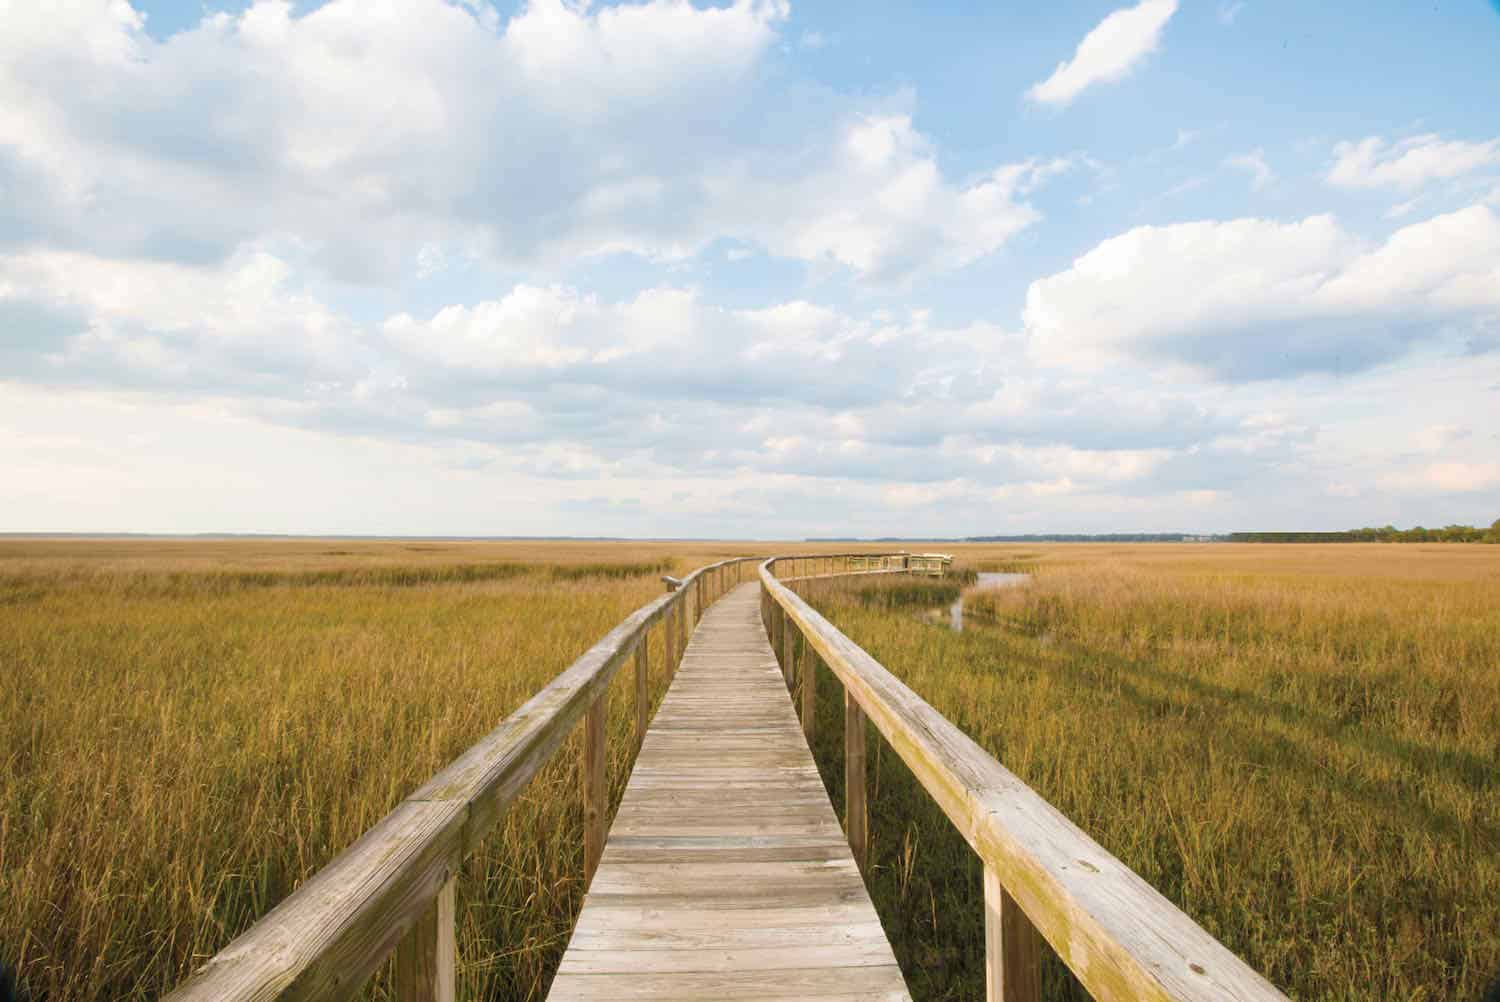 Wooden boardwalk leading out over a marsh filled with sea grass